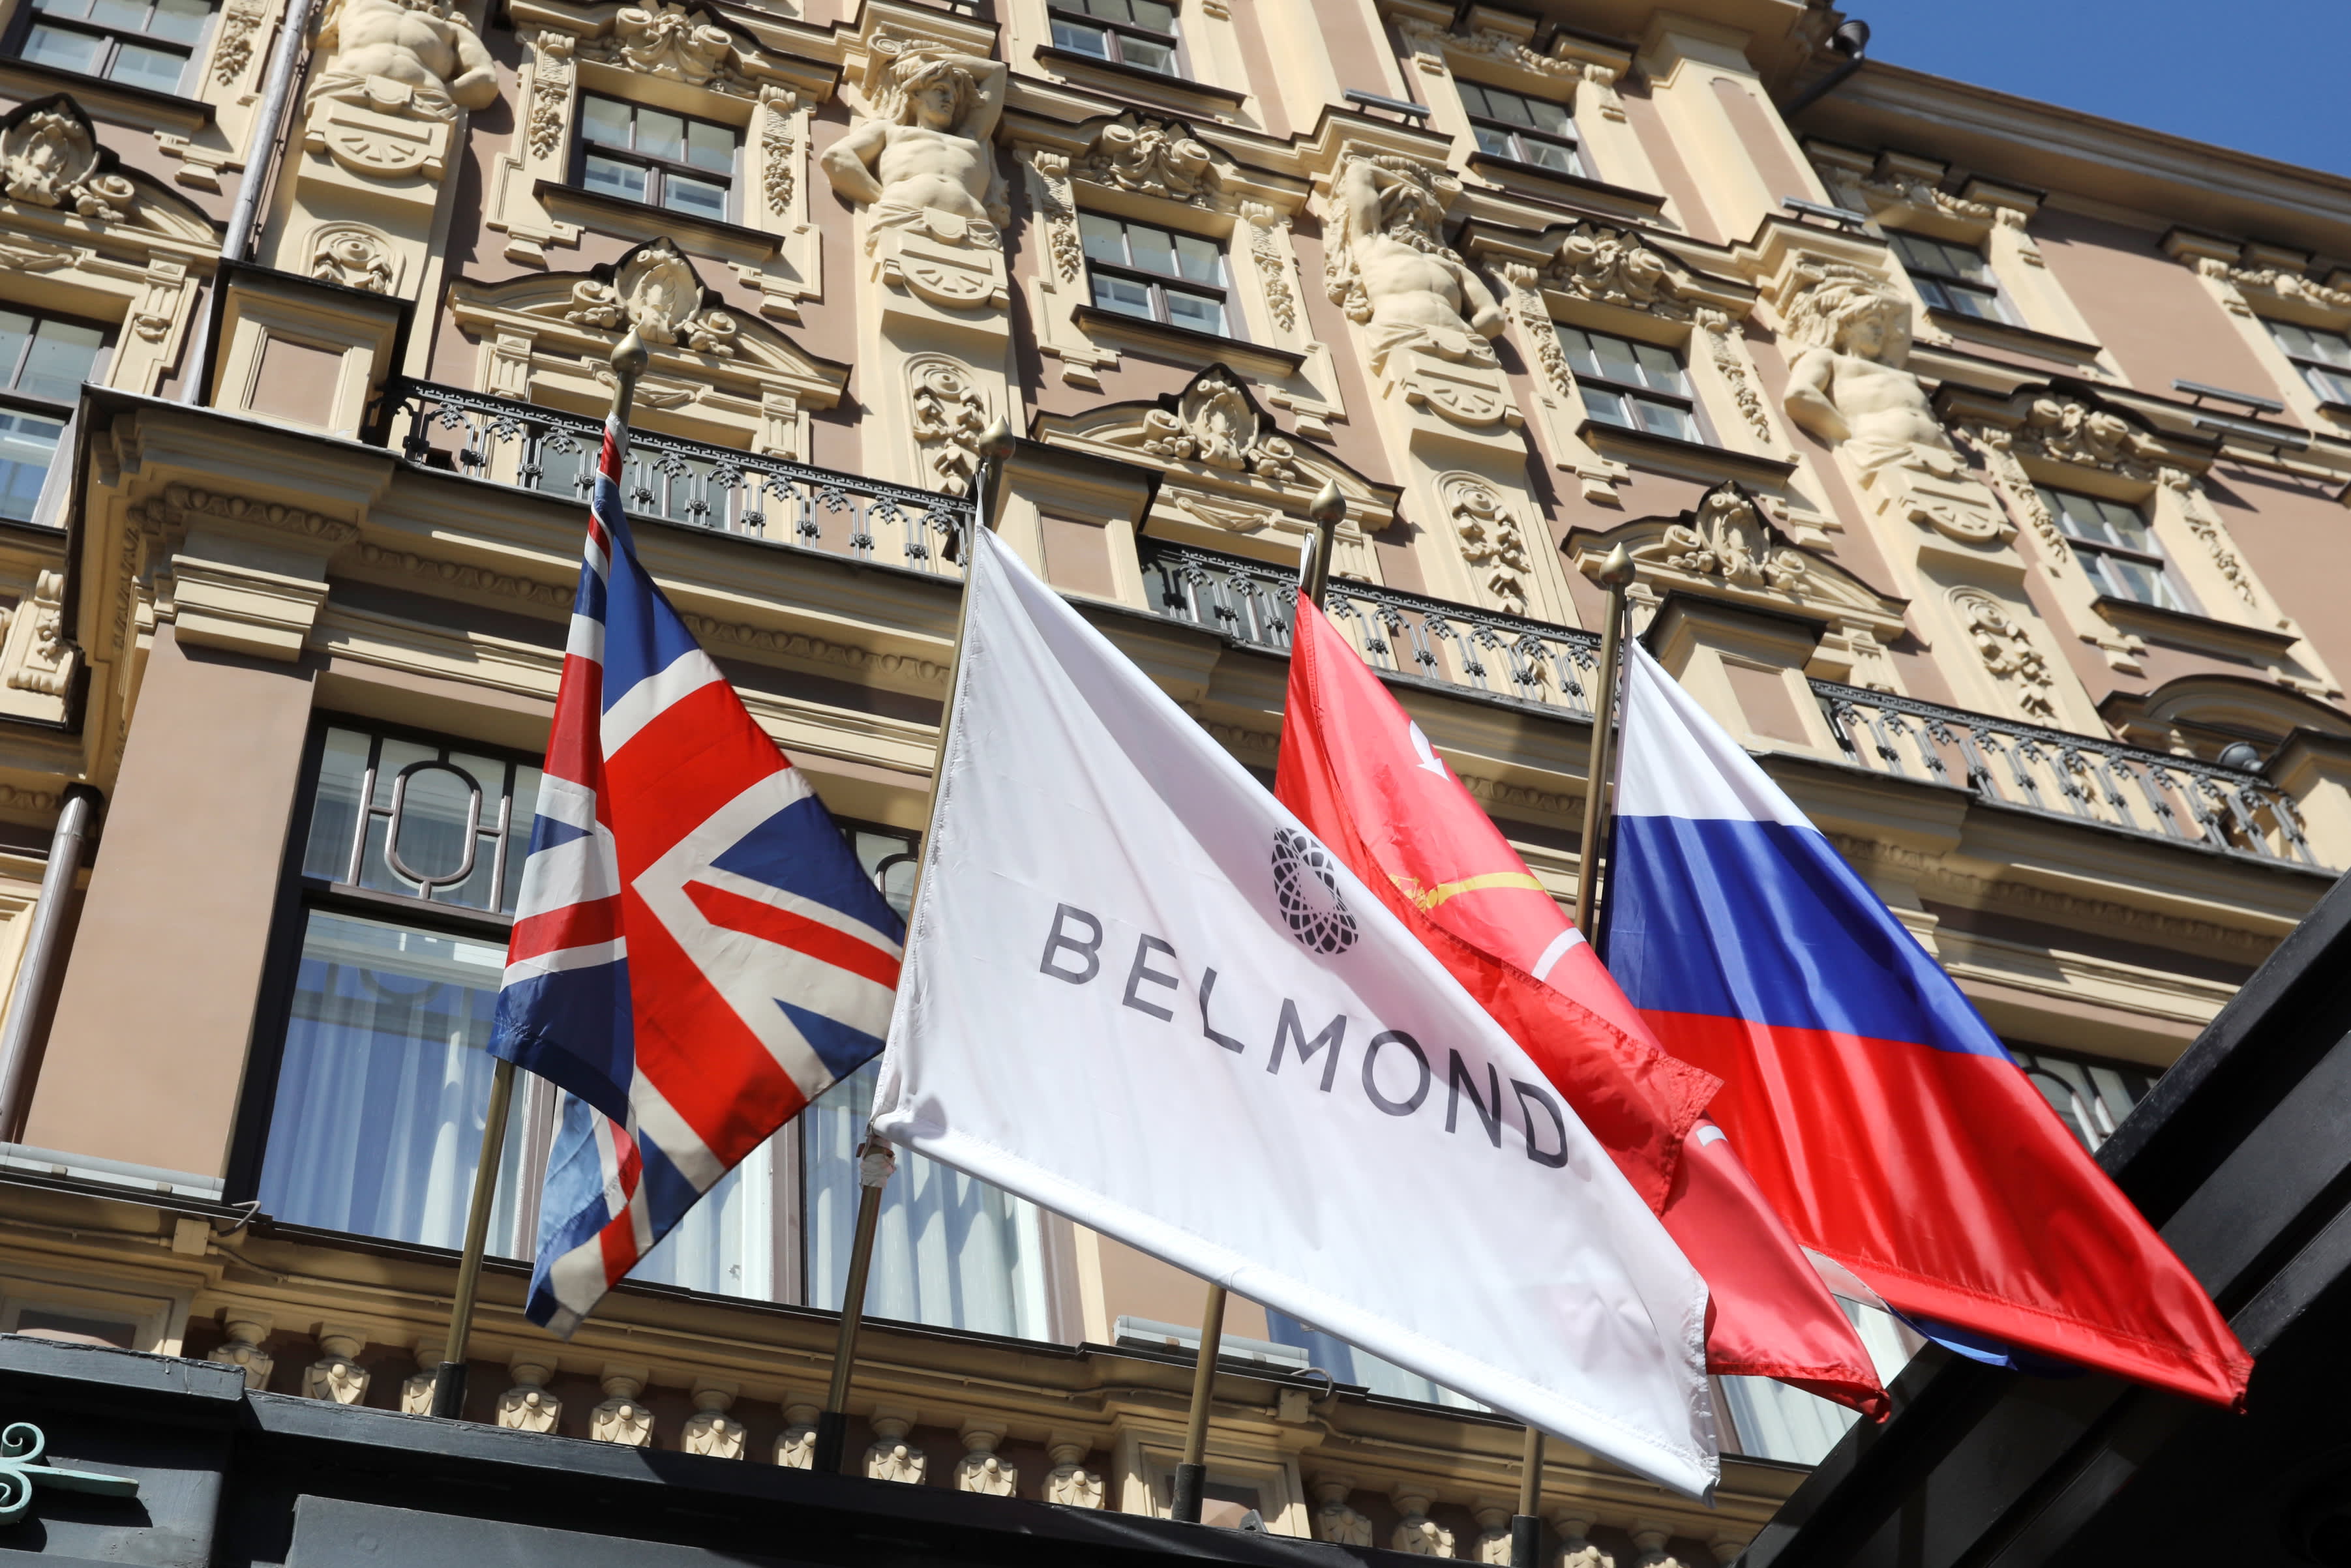 What The Belmond Acquisition Means For LVMH